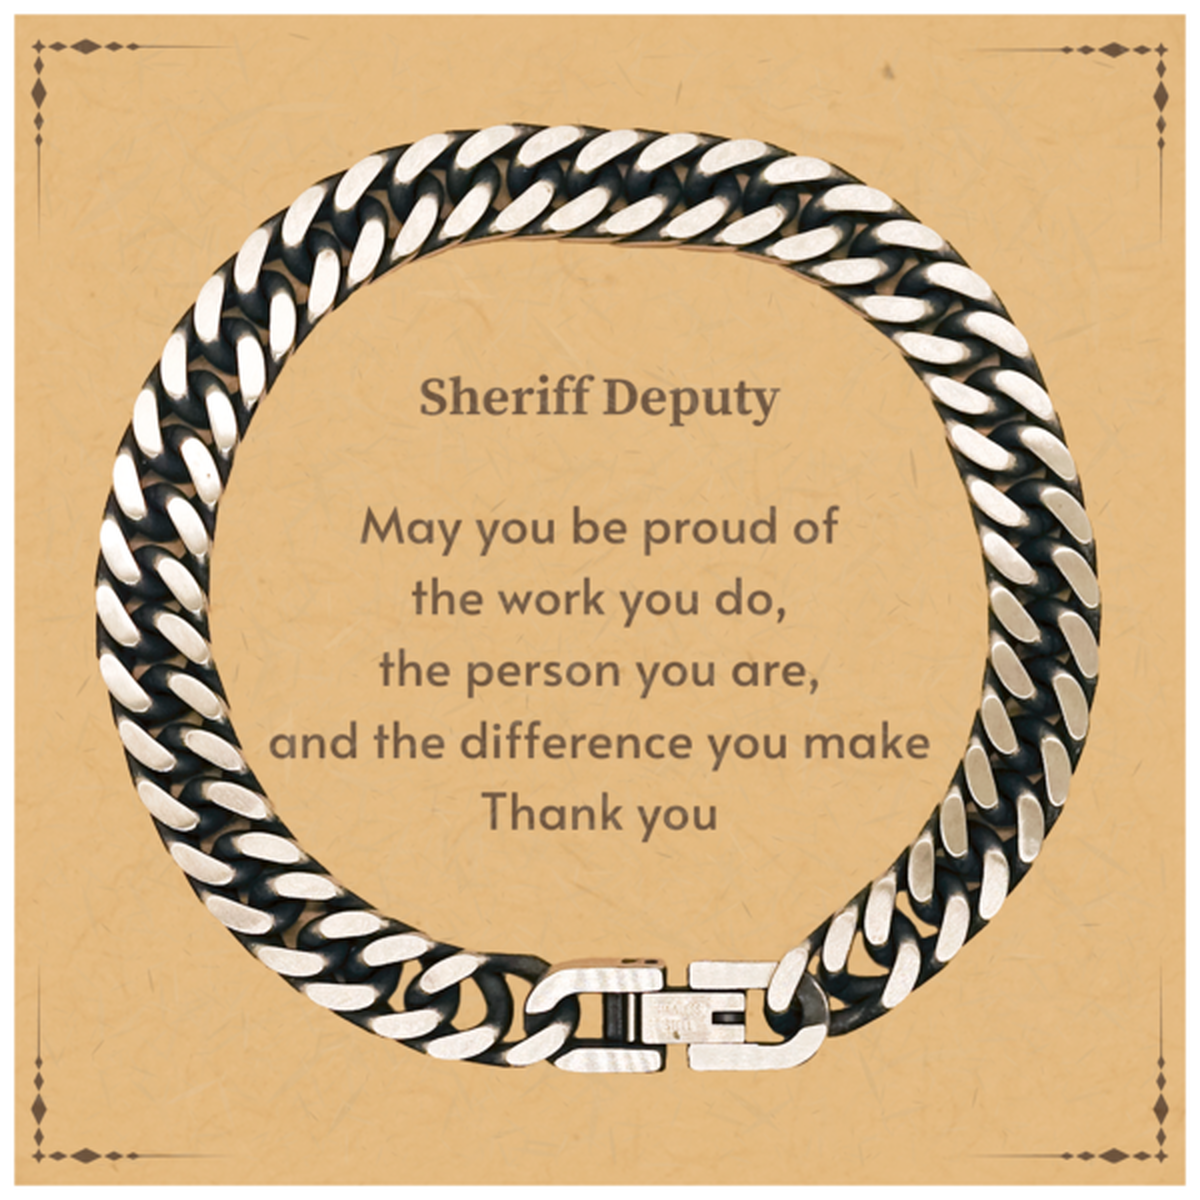 Heartwarming Cuban Link Chain Bracelet Retirement Coworkers Gifts for Sheriff Deputy, Sheriff Deputy May You be proud of the work you do, the person you are Gifts for Boss Men Women Friends